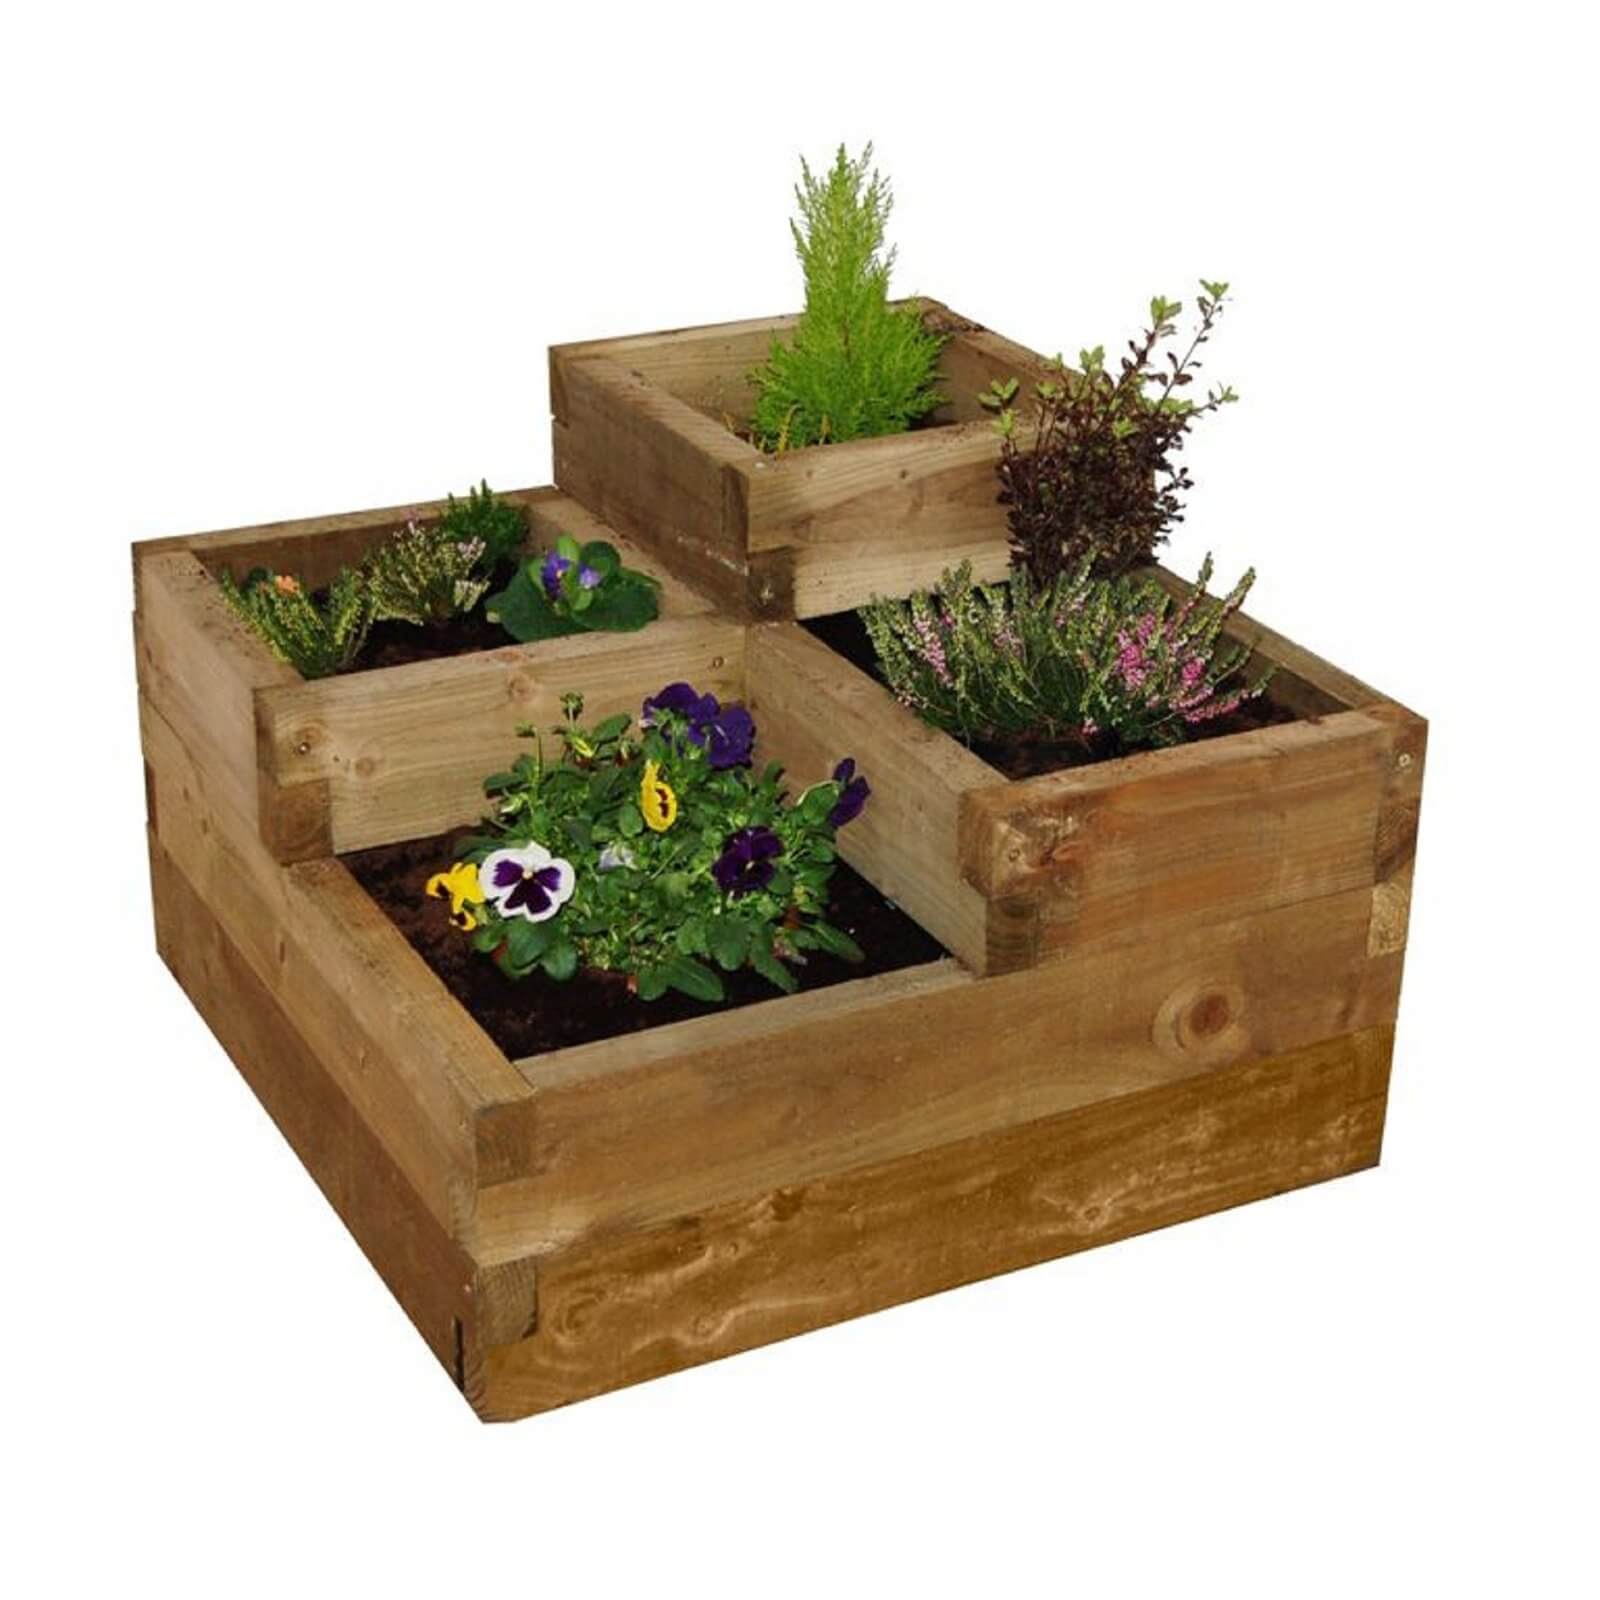 Forest Caledonian Tiered Wooden Raised Bed